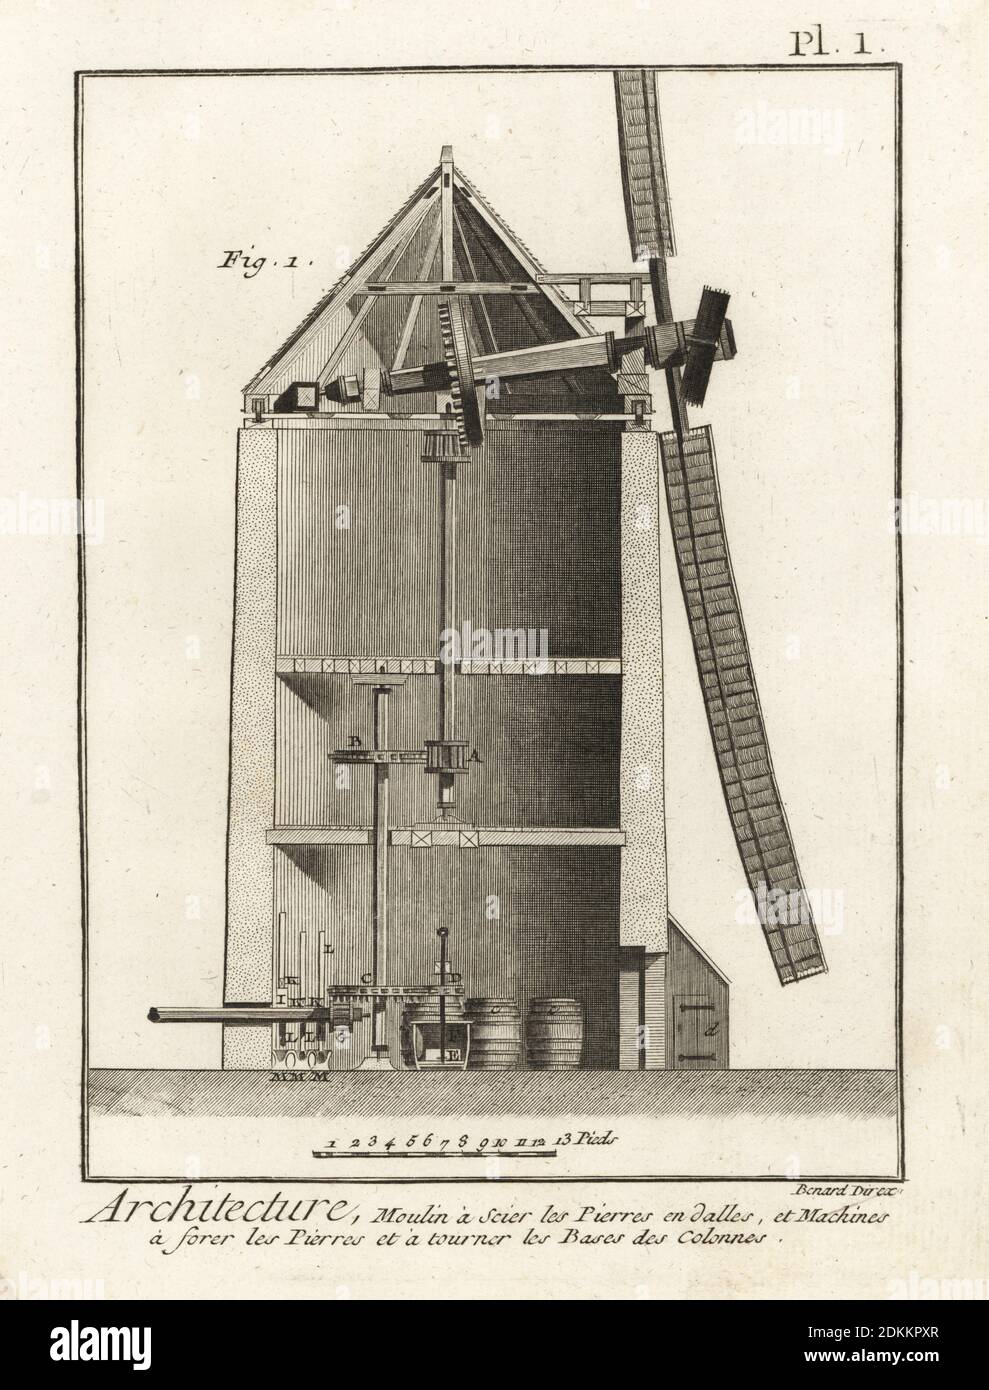 Cross-section elevation through a windmill for stone cutting, drilling and turning machines. Copperplate engraving by Robert Benard from Denis Diderot and Jean le Rond d’Alembert’s Encyclopedie (Encyclopedia), Geneva, 1778. Stock Photo